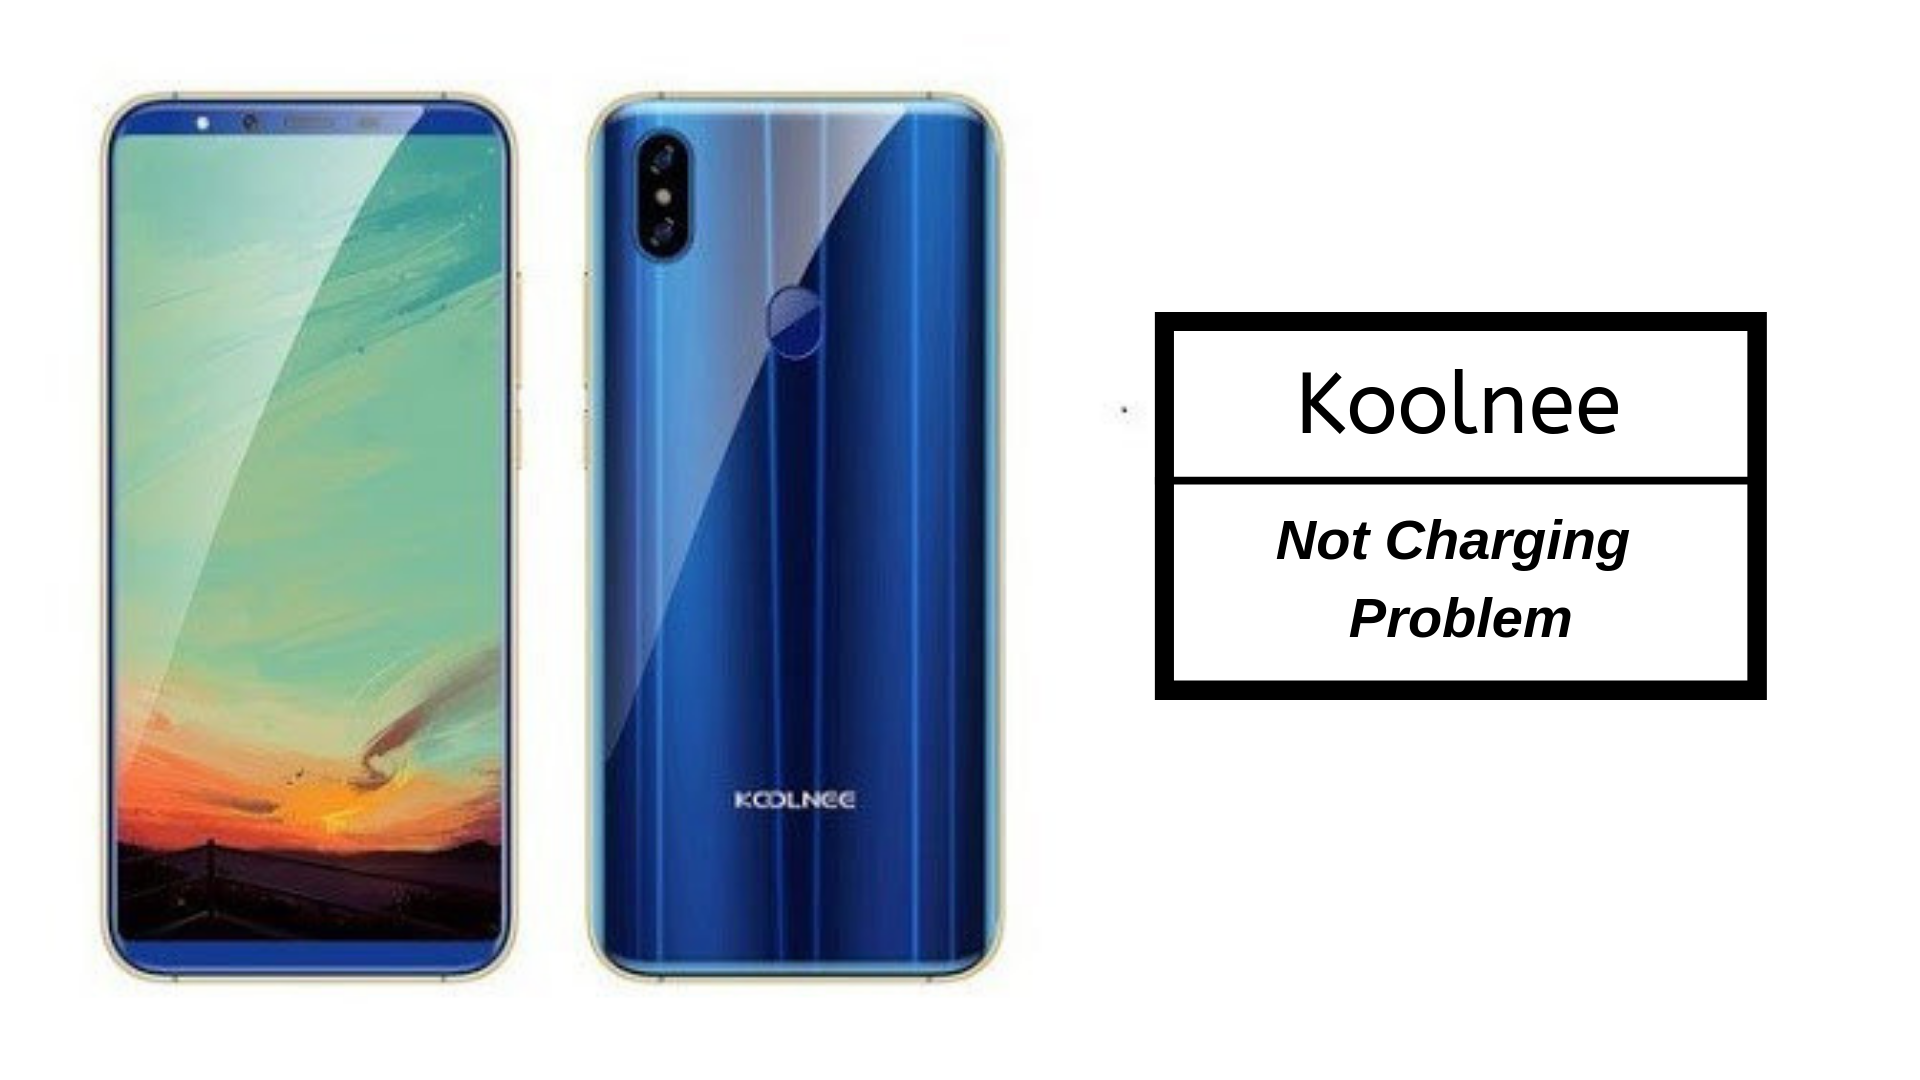 How To Fix Koolnee Not Charging Problem [Troubleshoot]